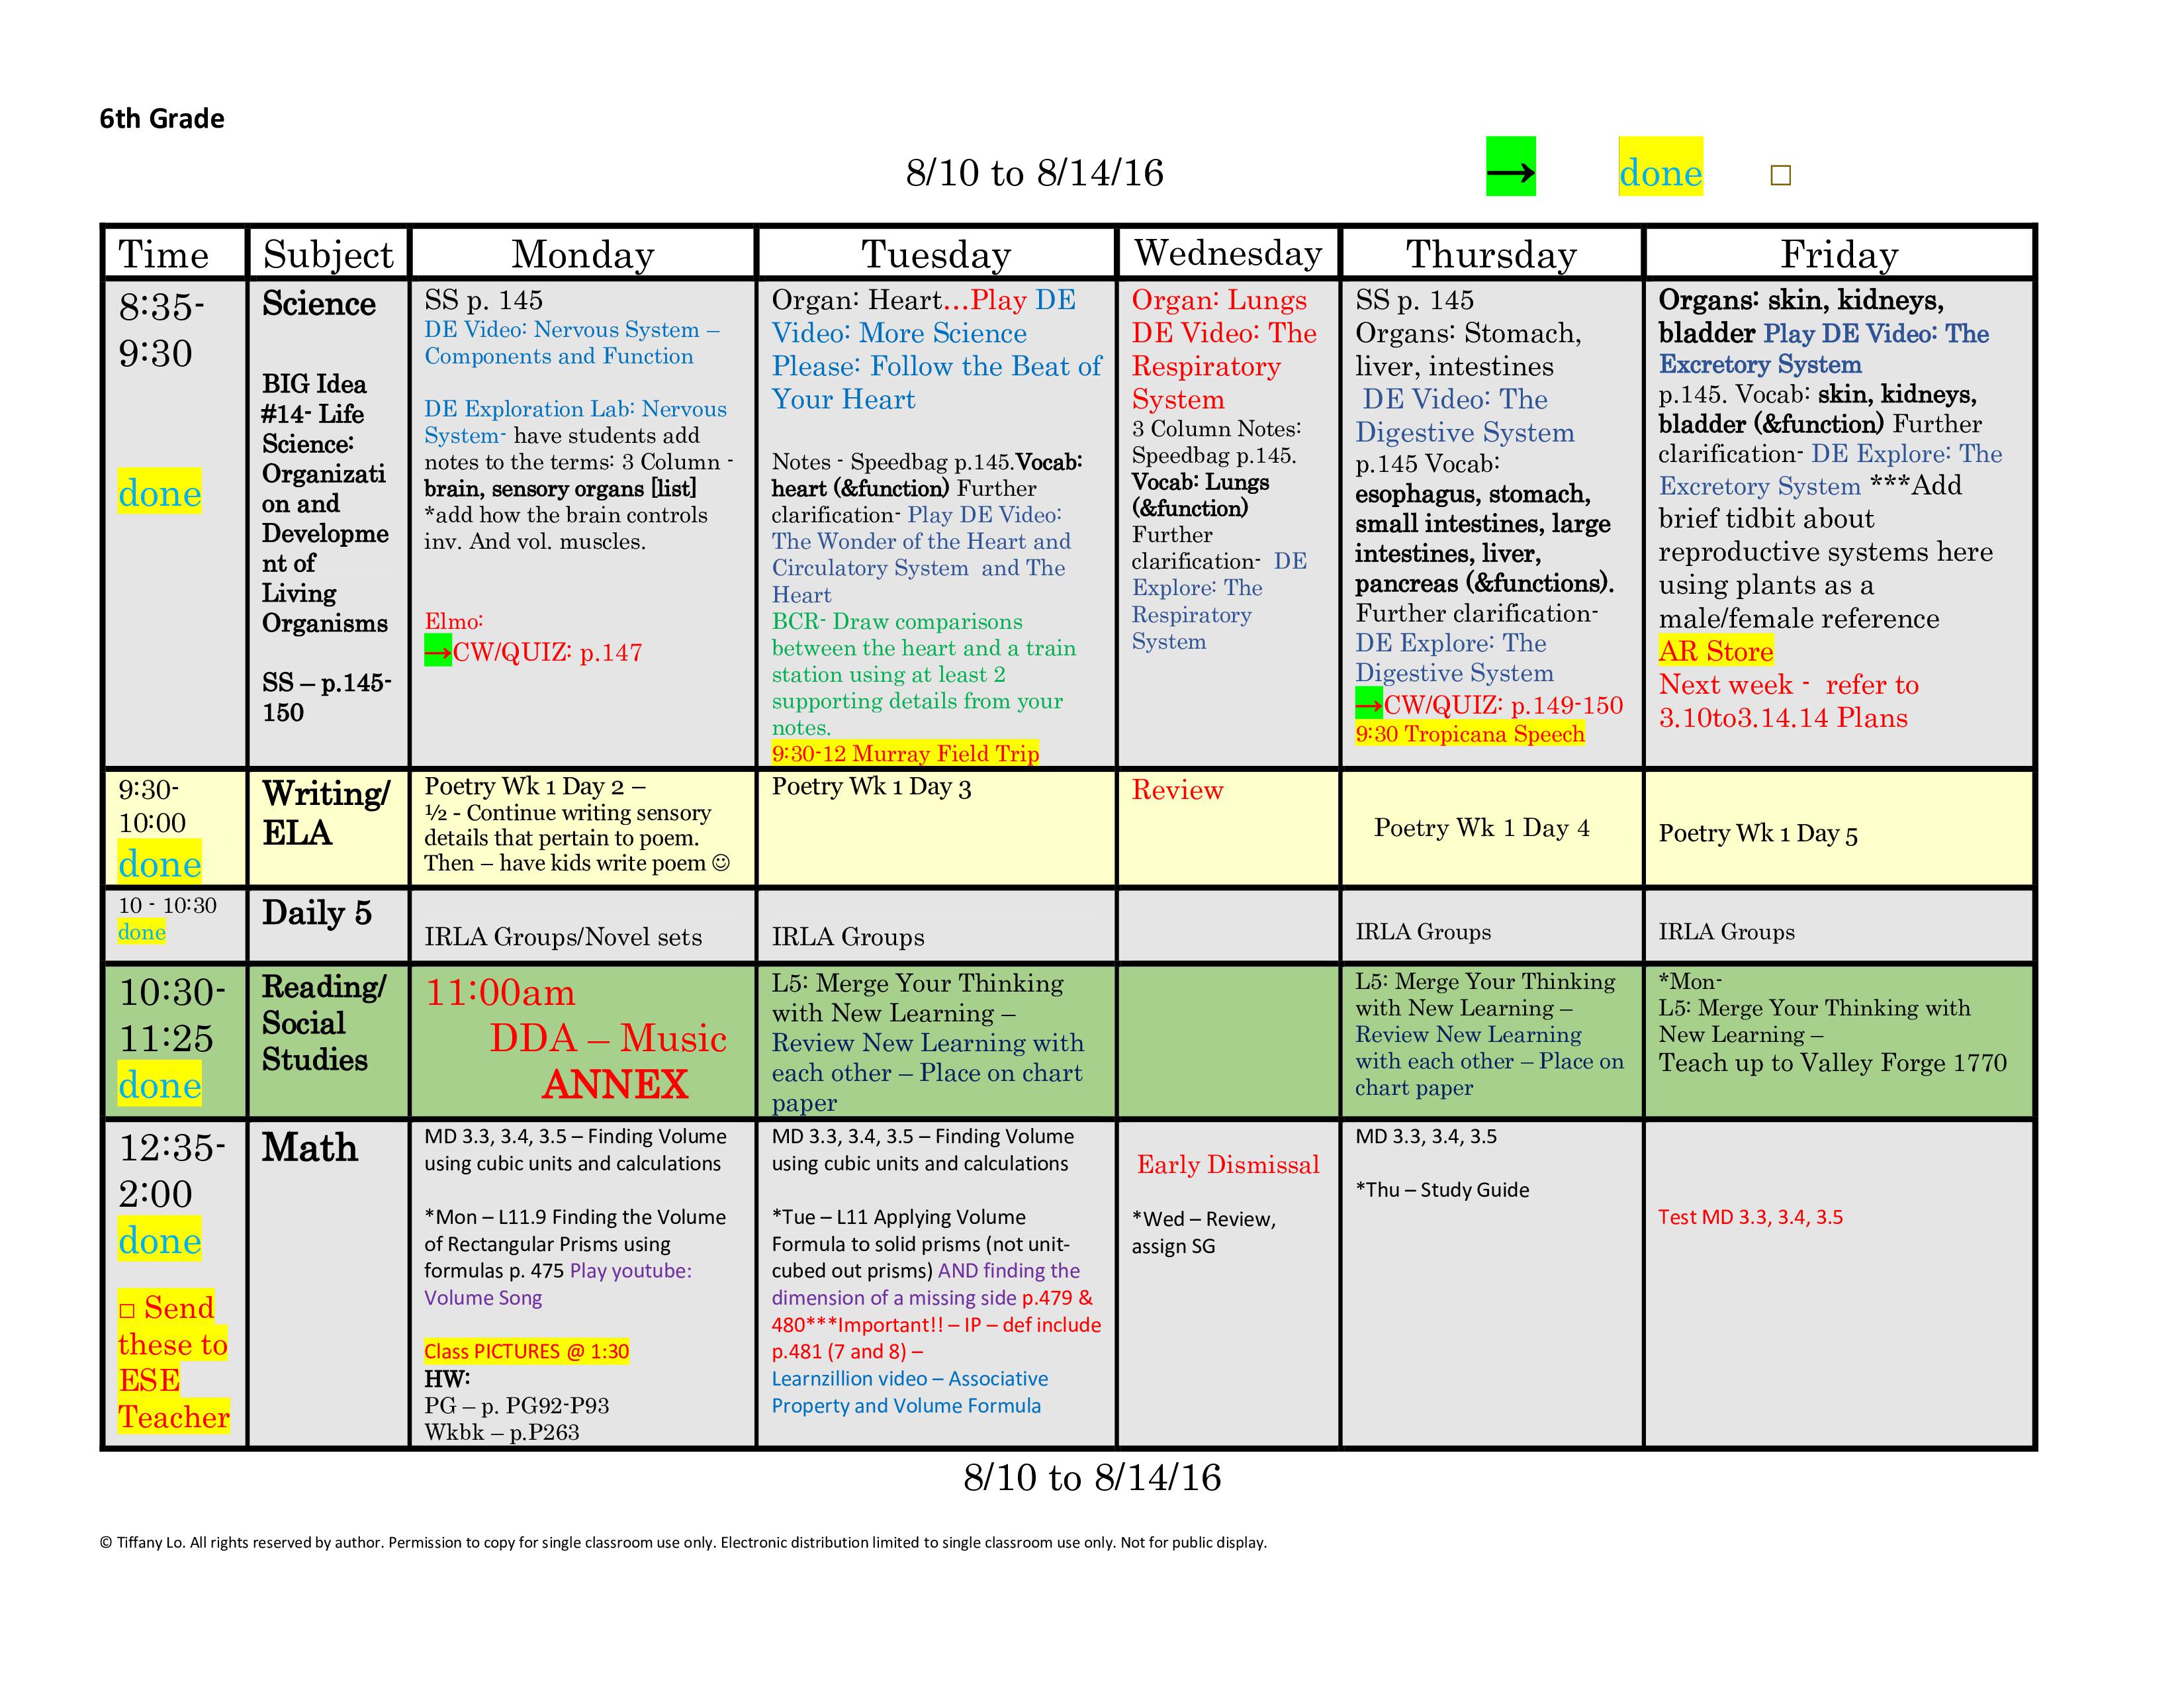 6th-sixth-grade-lesson-plan-template-one-week-one-page-glance-of-all